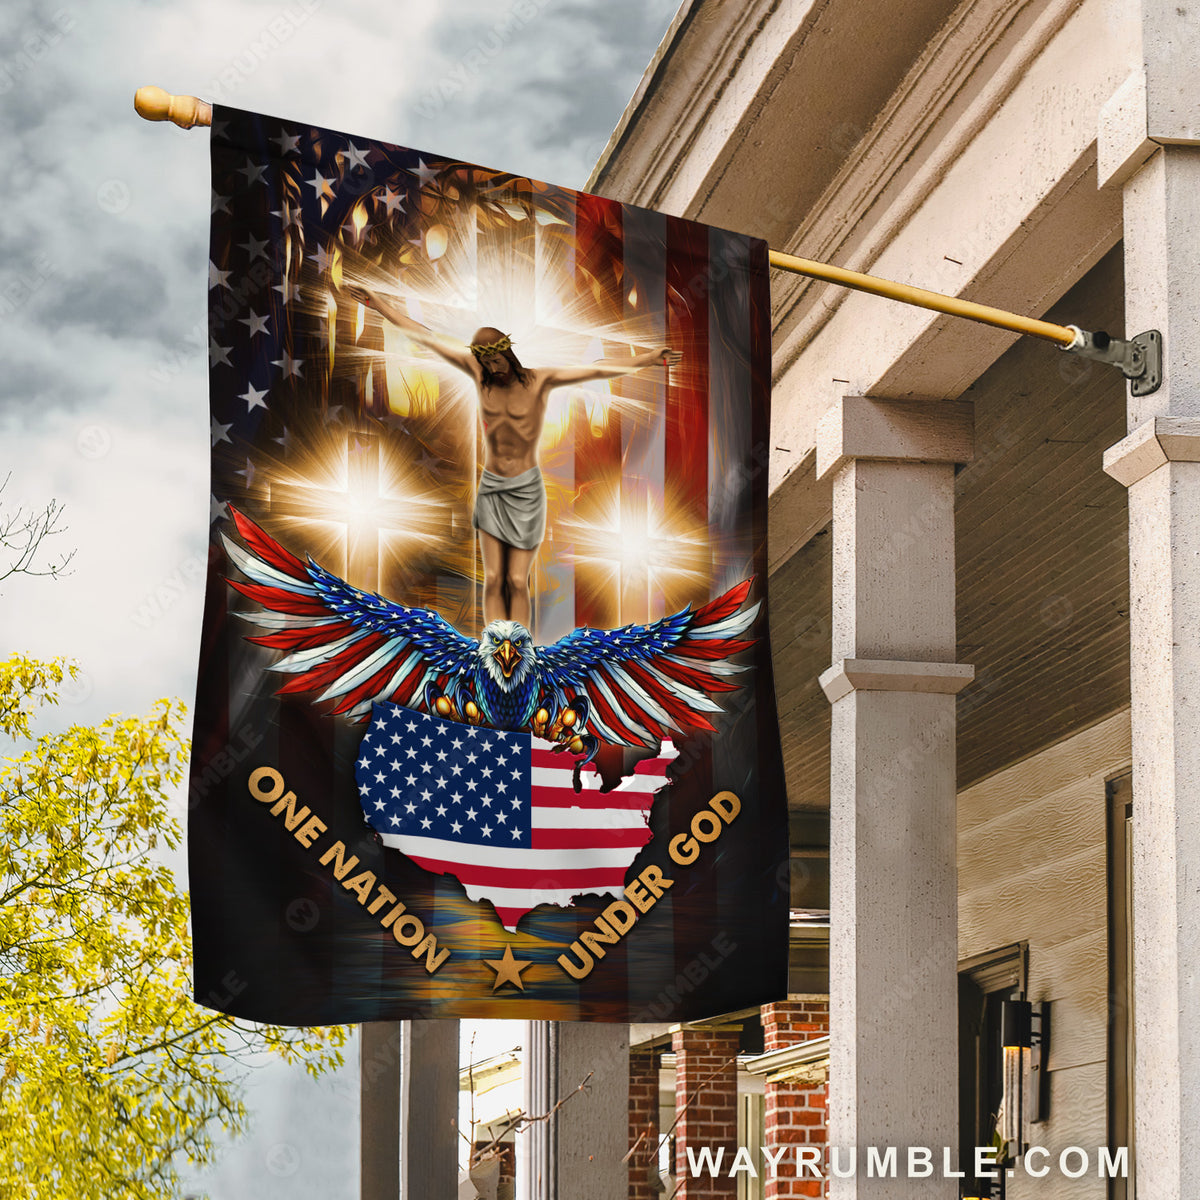 Jesus on the cross, Stunning eagle, US flag painting, One nation ...